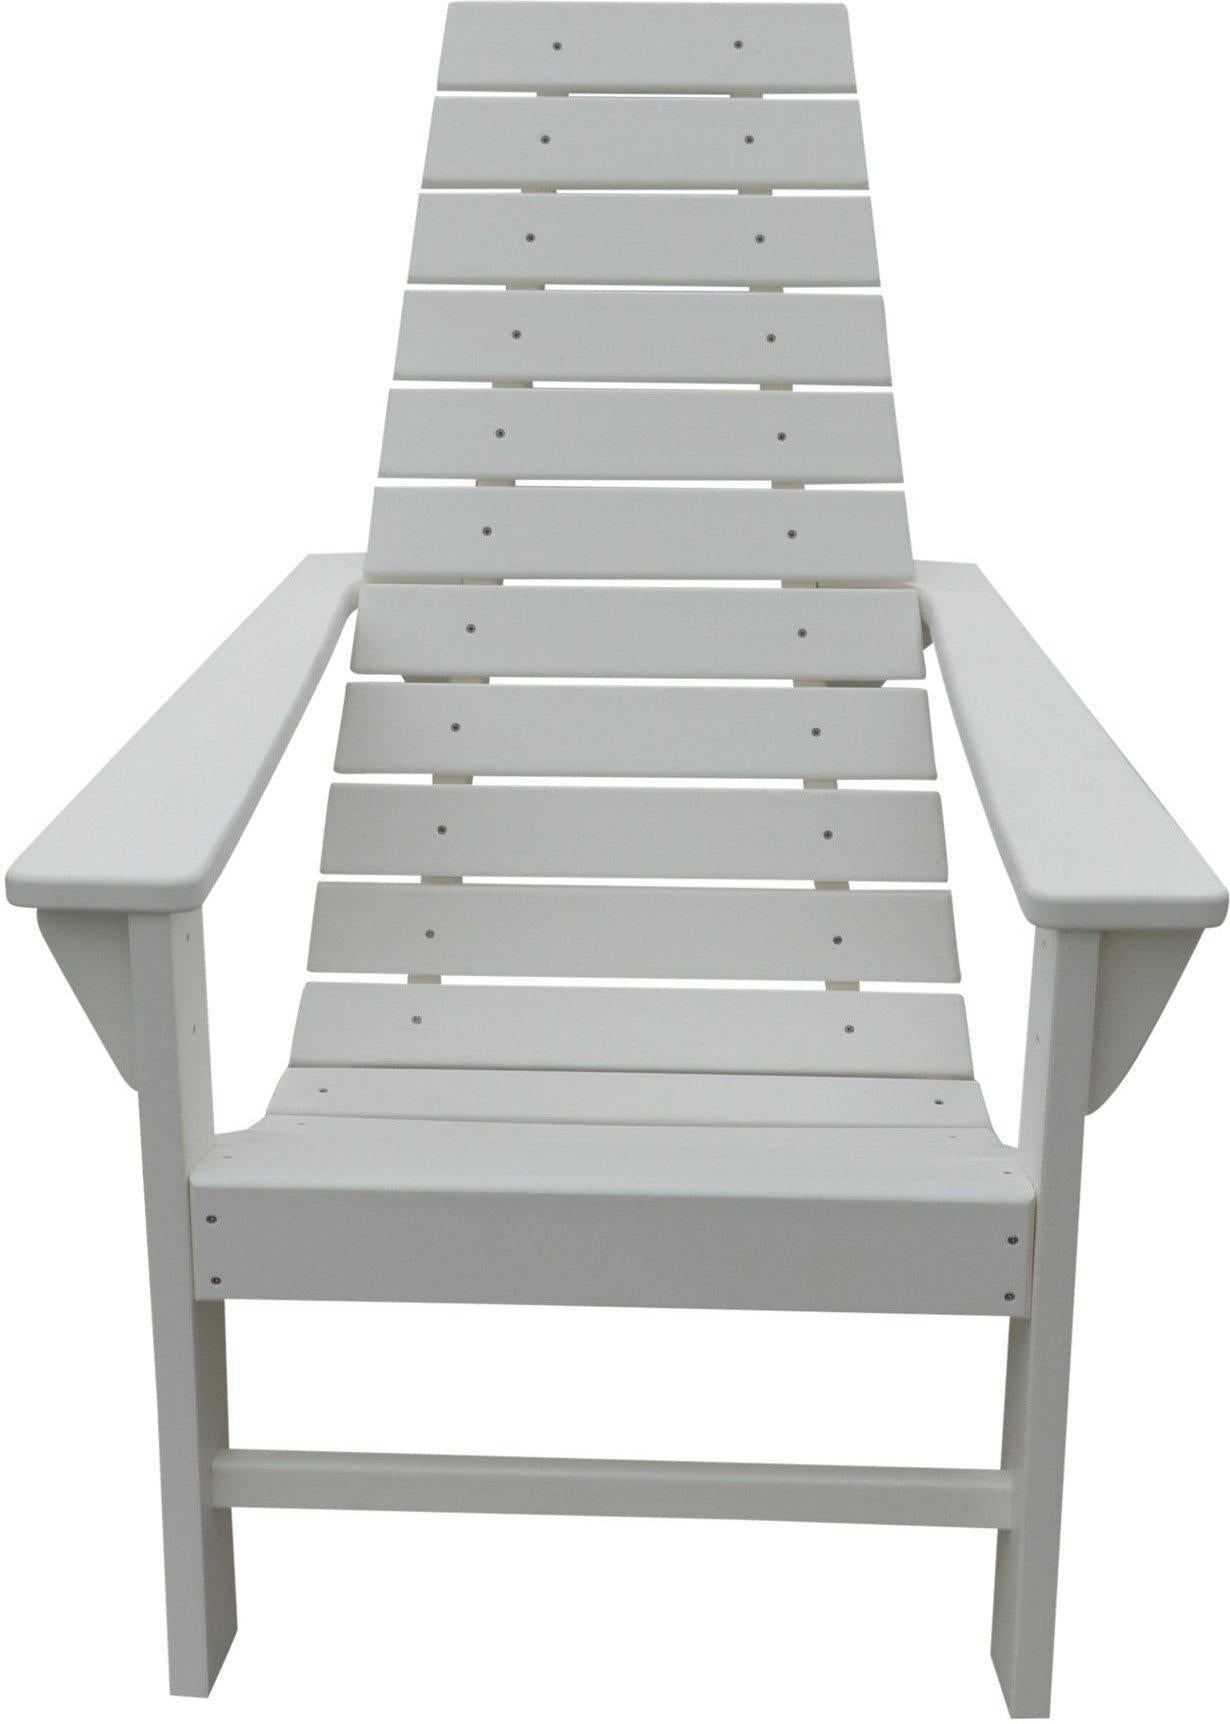 A&L Furniture Co. Recycled Plastic New Hope Contemporary Adirondack Chair - LEAD TIME TO SHIP 10 BUSINESS DAYS